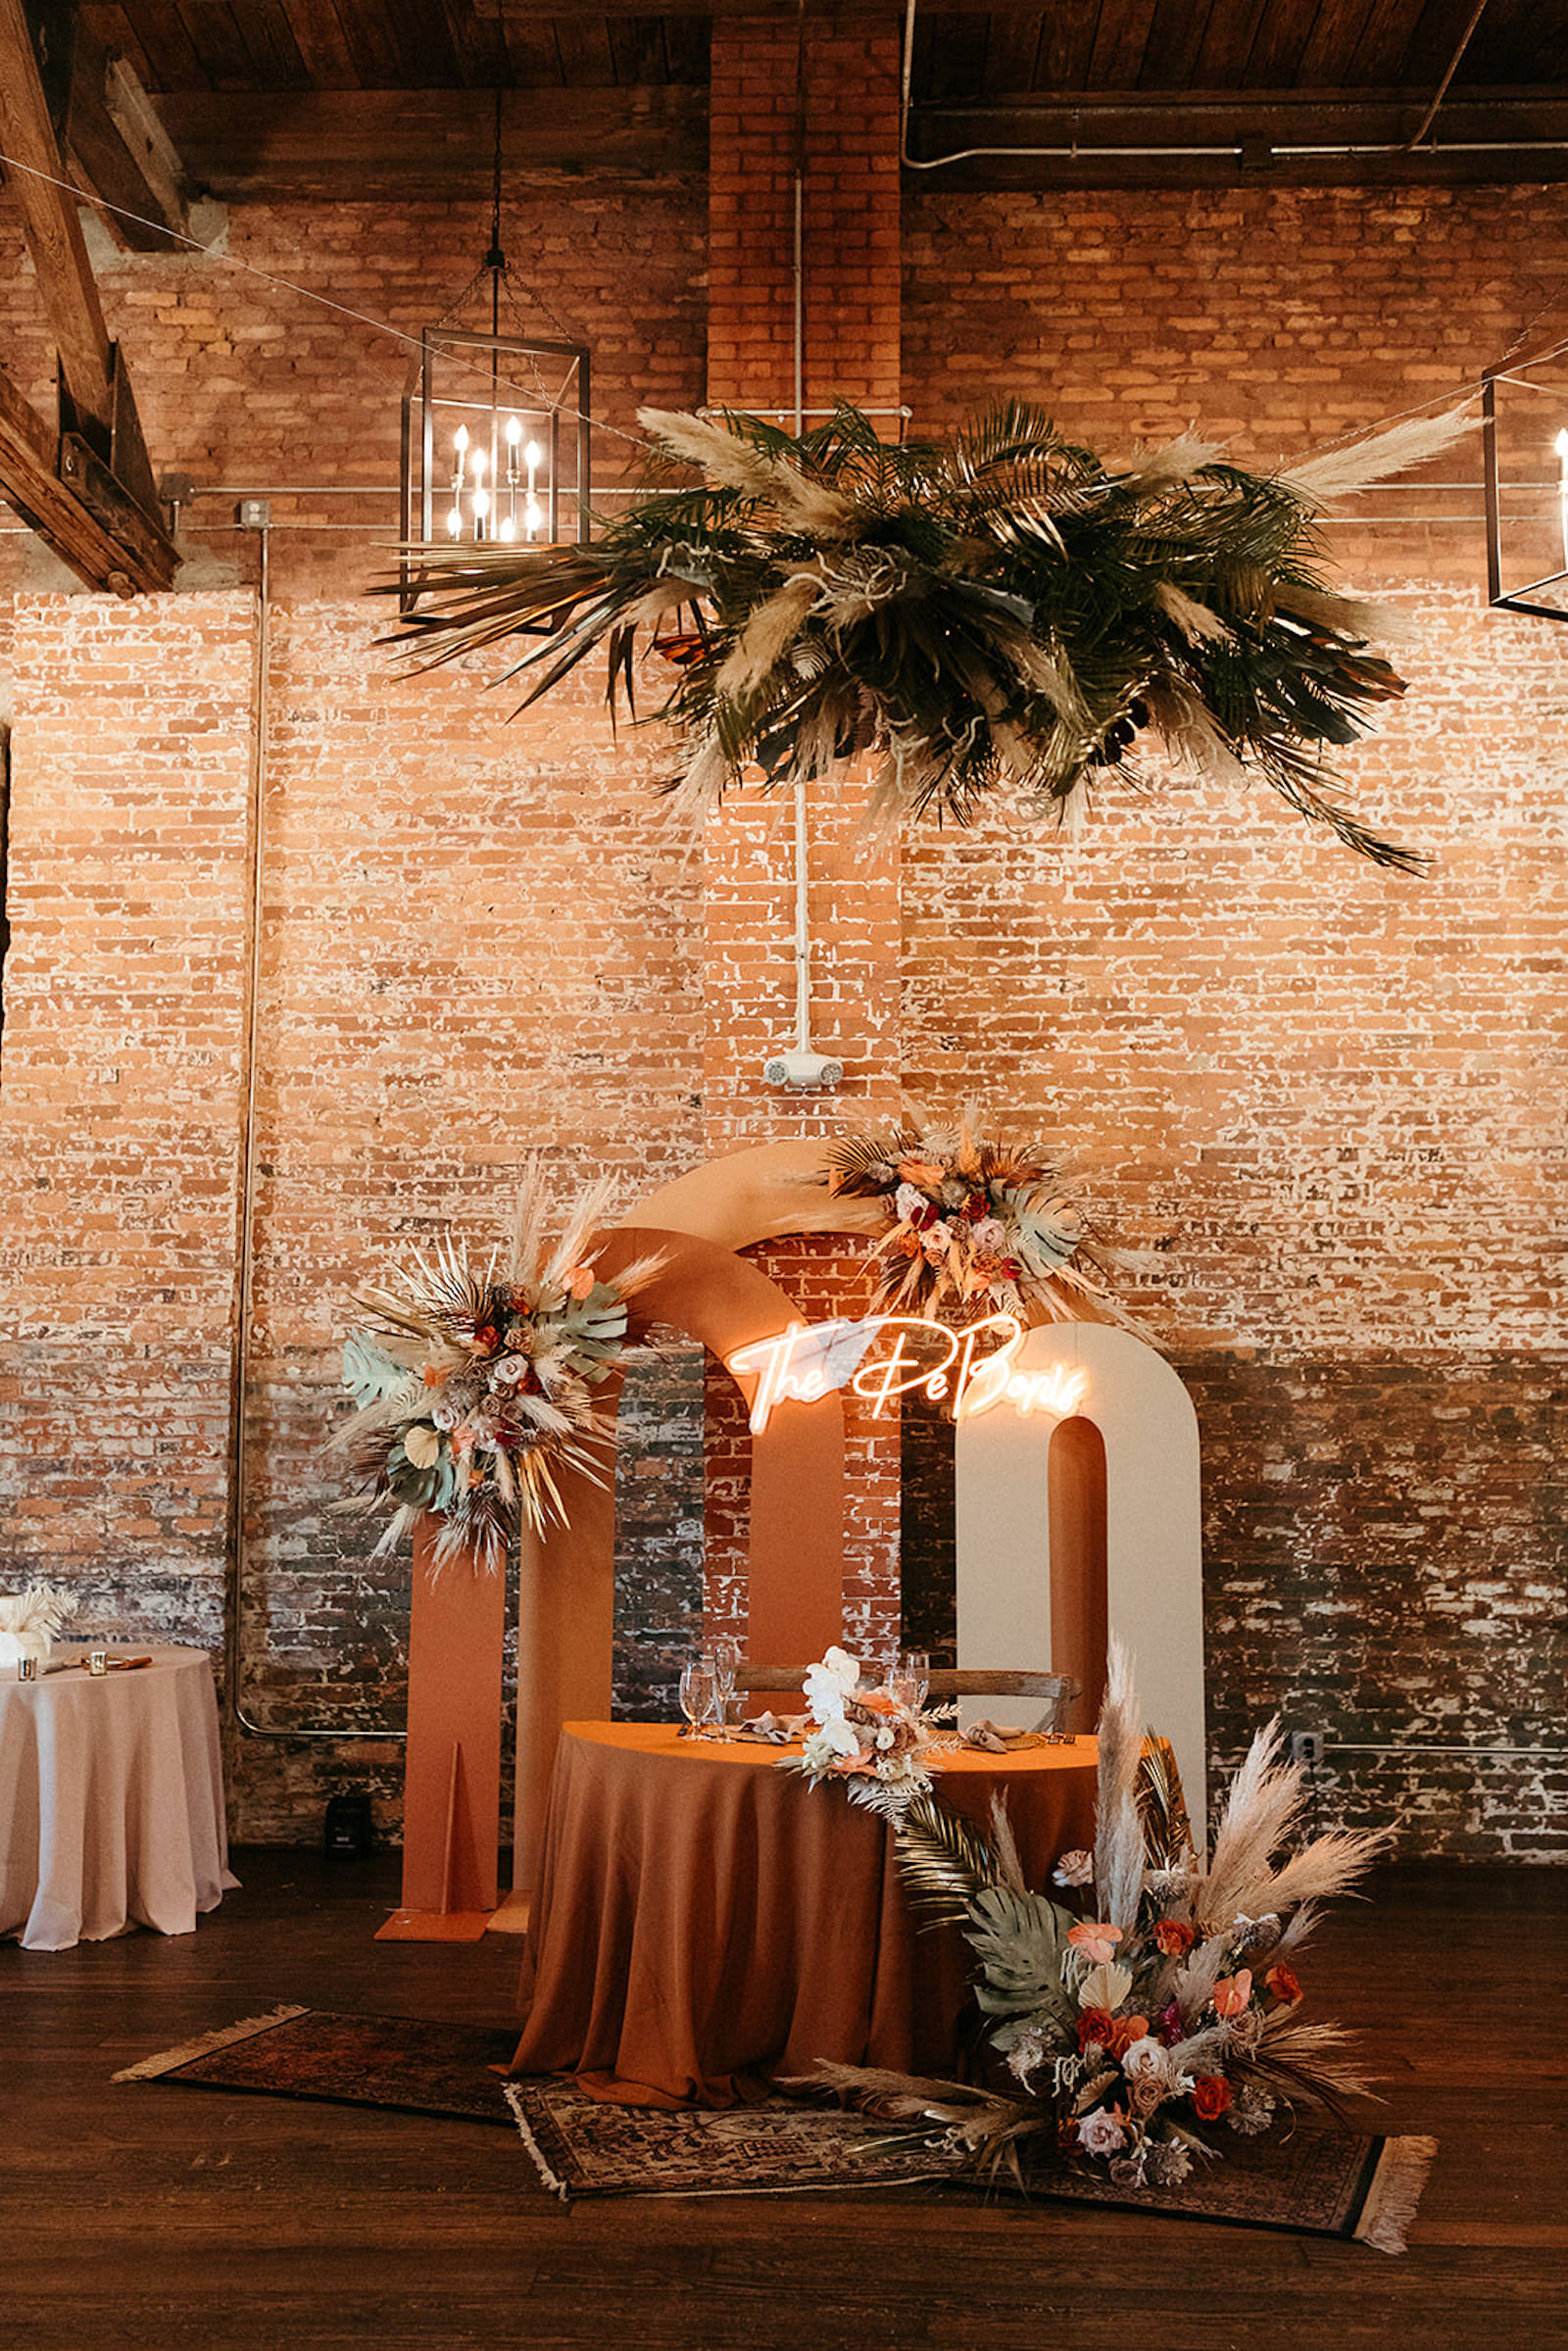 Earthy Neutral Boho Modern Chic Wedding Reception Decor, Sweetheart Table with Terracotta Table Linen, Cream and Brown Arched Panels, Lush Floral Bouquets with Pampas Grass, Monstera Palm Leaves, Palm Leaves Greenery with Pampas Grass Floral Chandelier | Tampa Bay Wedding Planner Wilder Mind Events | Wedding Florist Save the Date Florida | Wedding Venue Armature Works